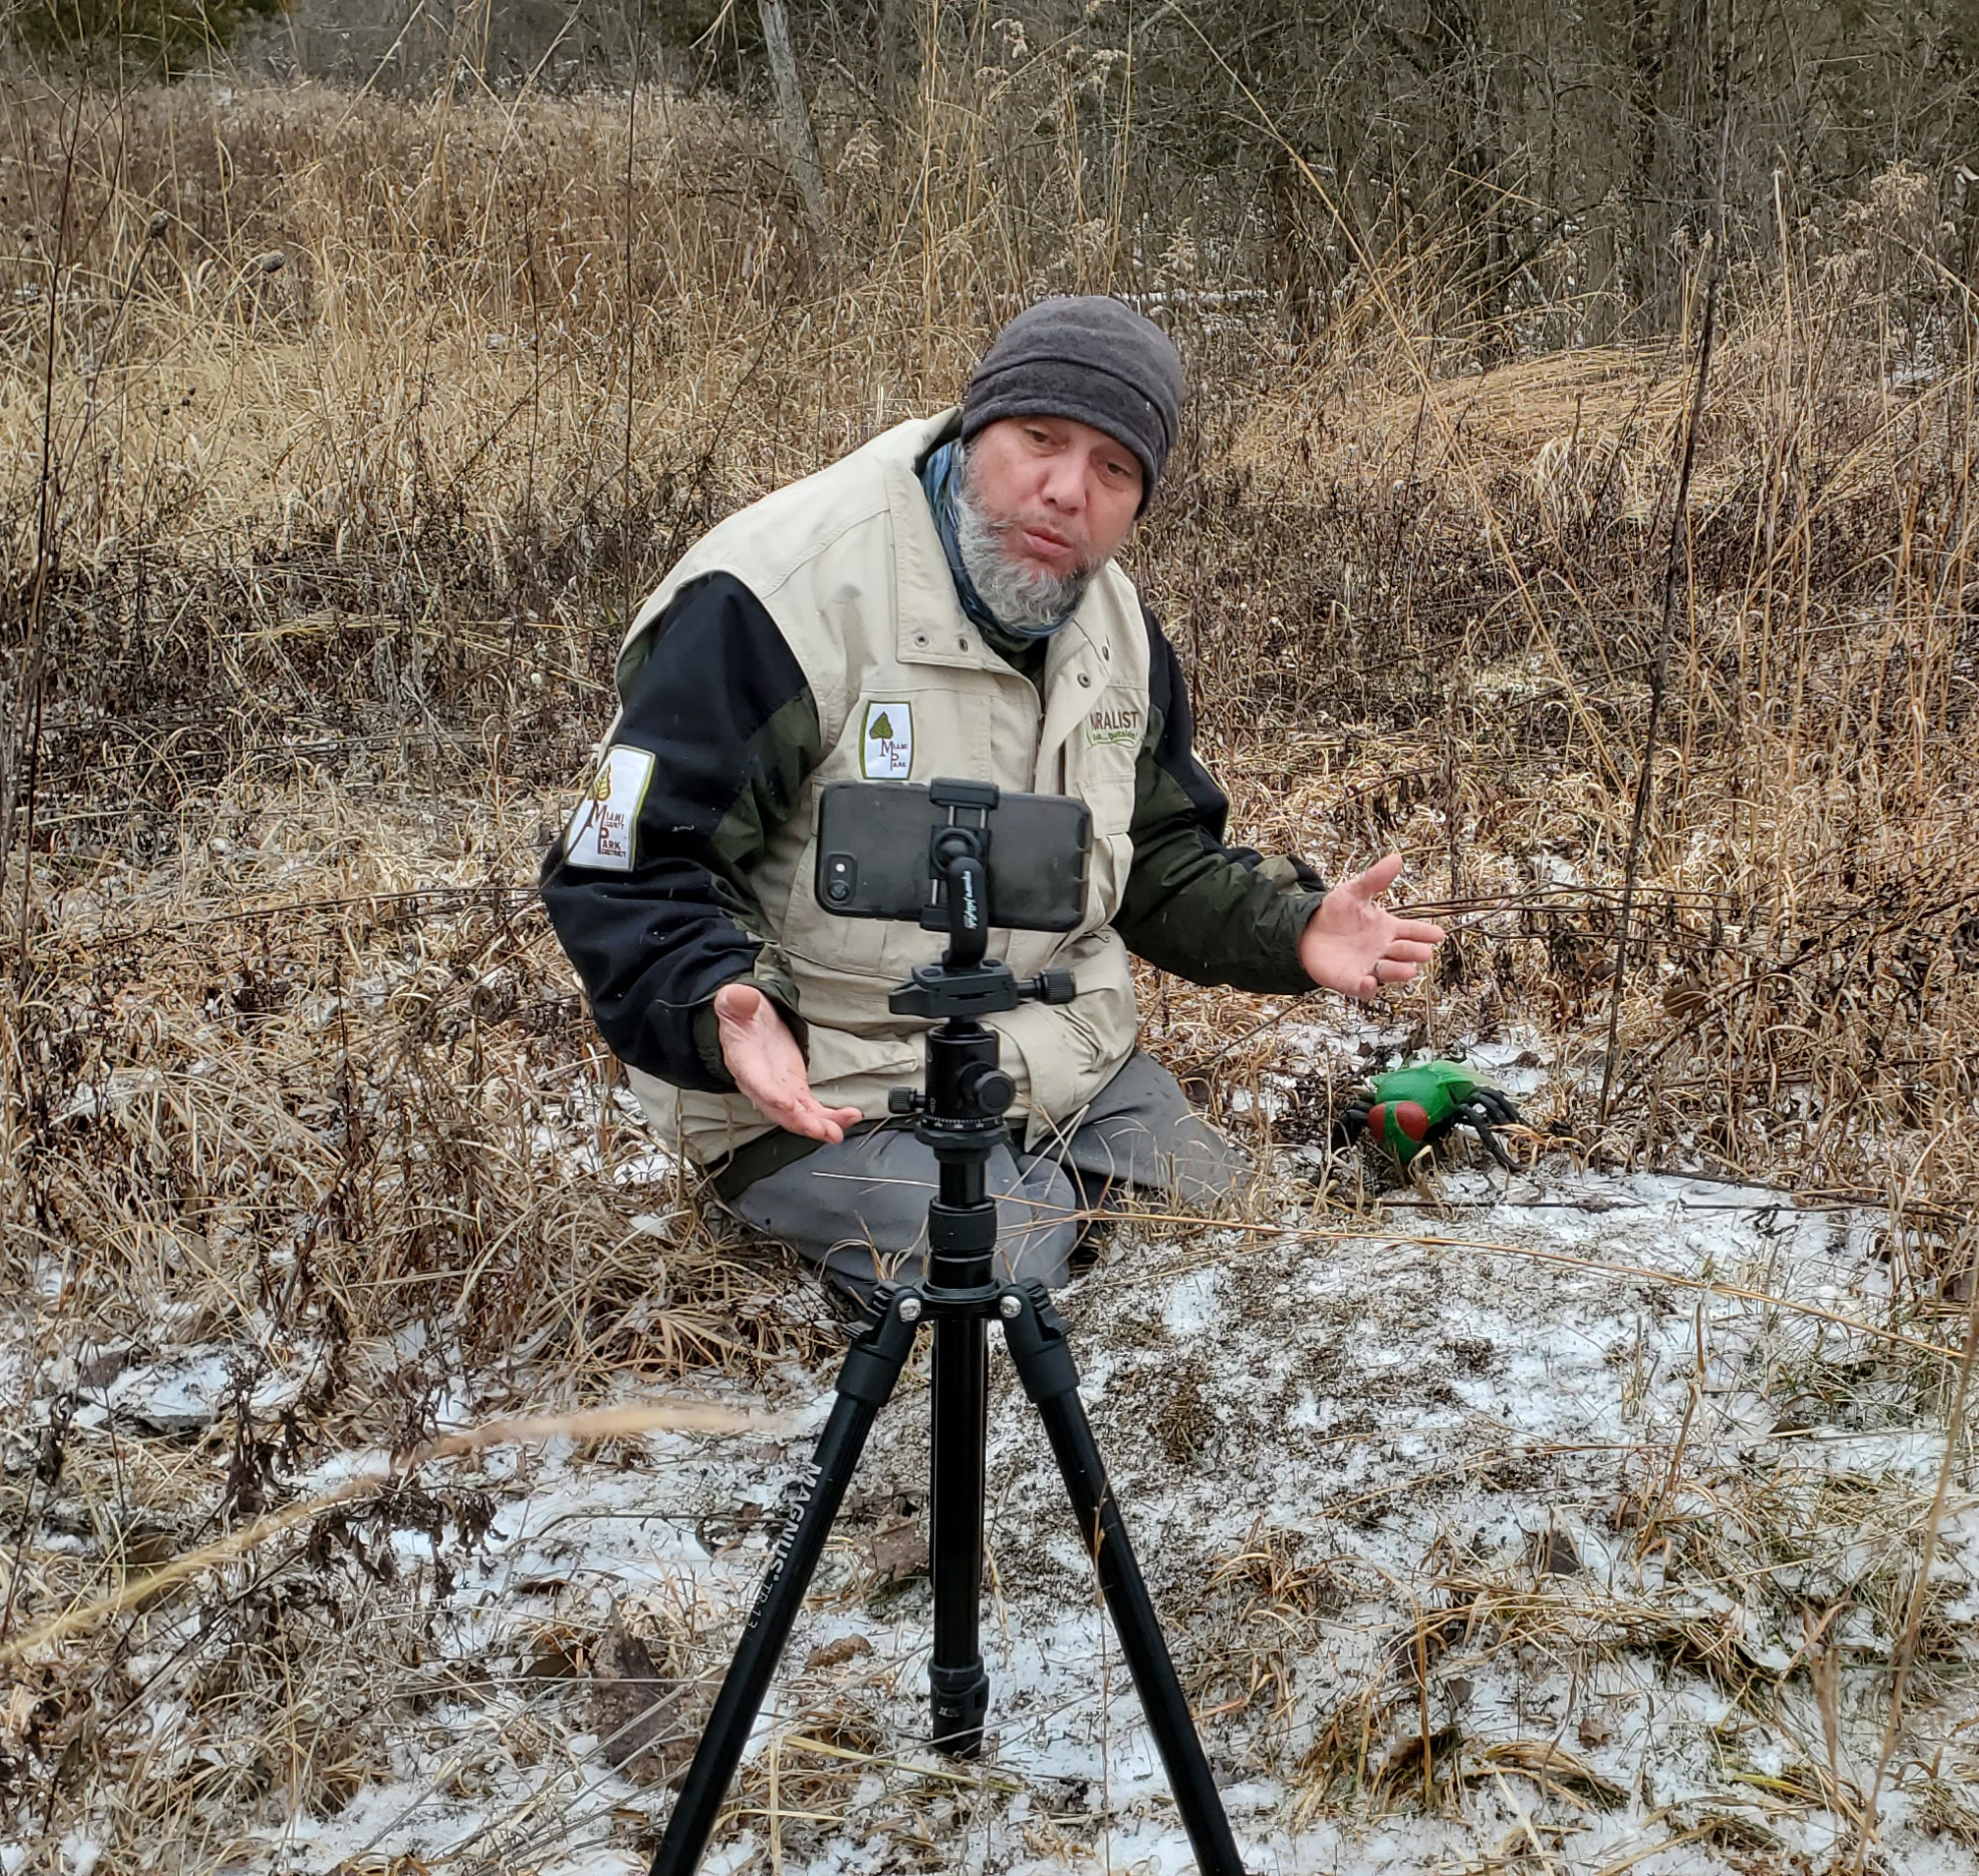 Naturalist in a field during winter